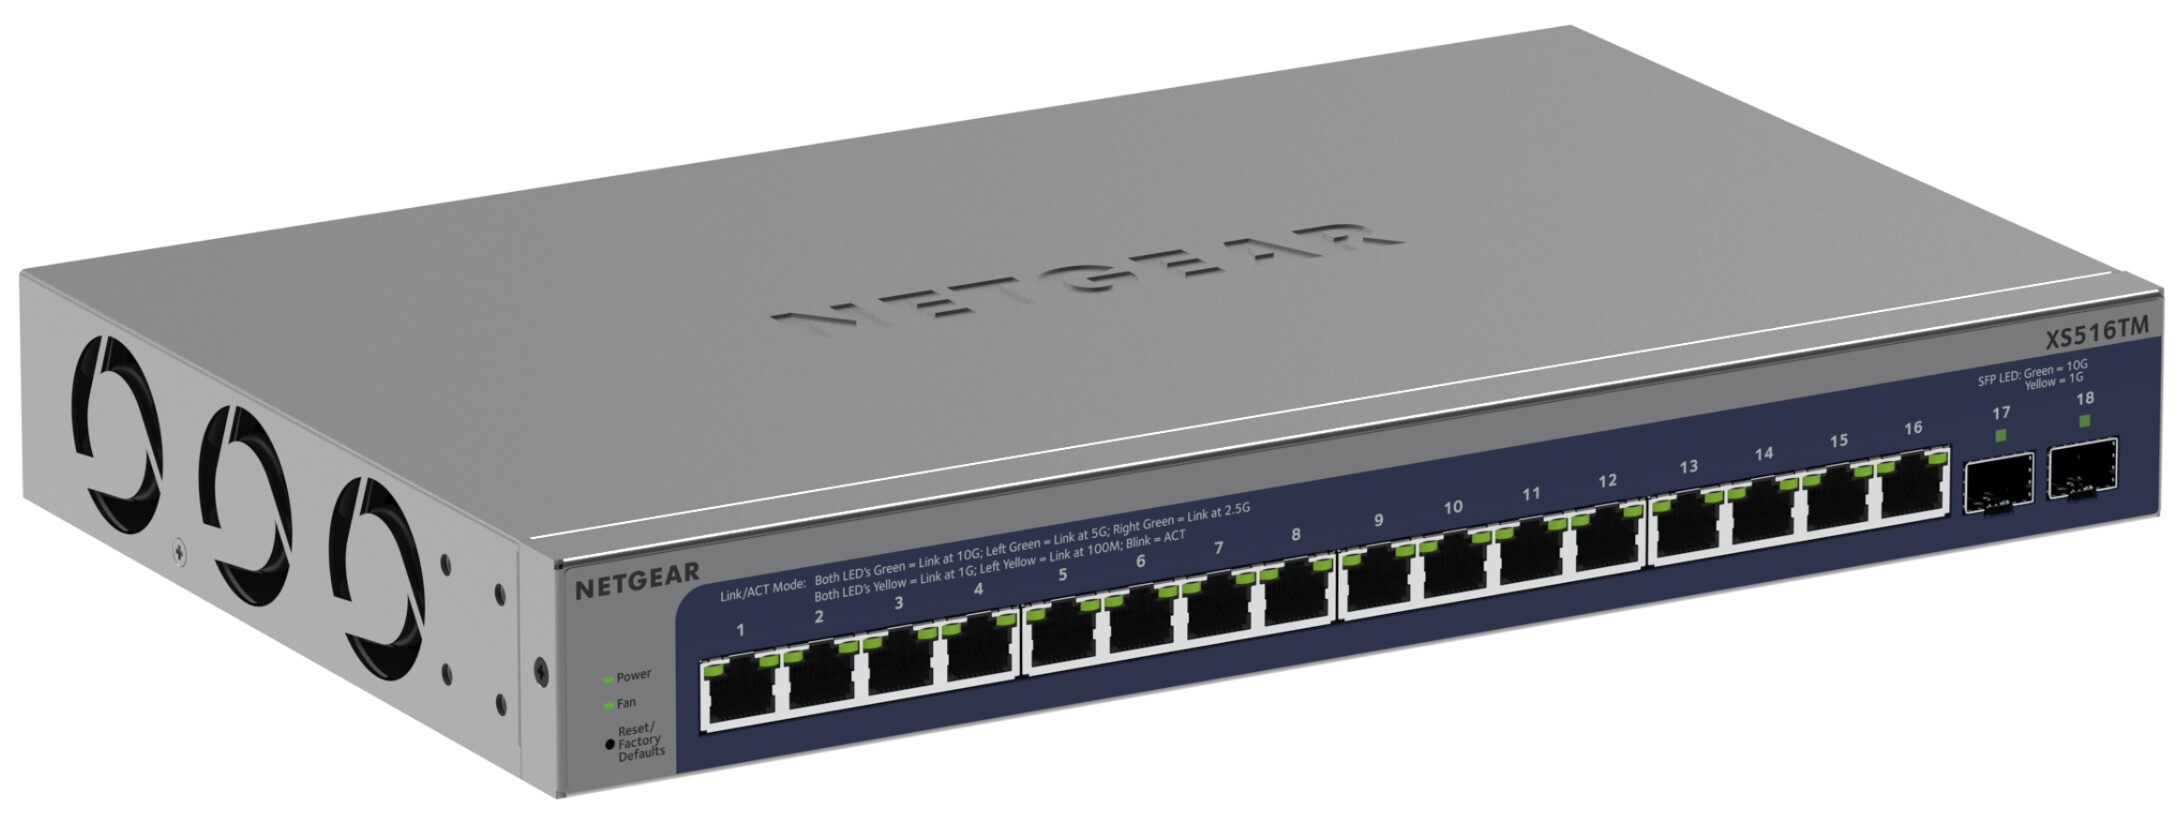 10G Smart Cloud Switches - Switch